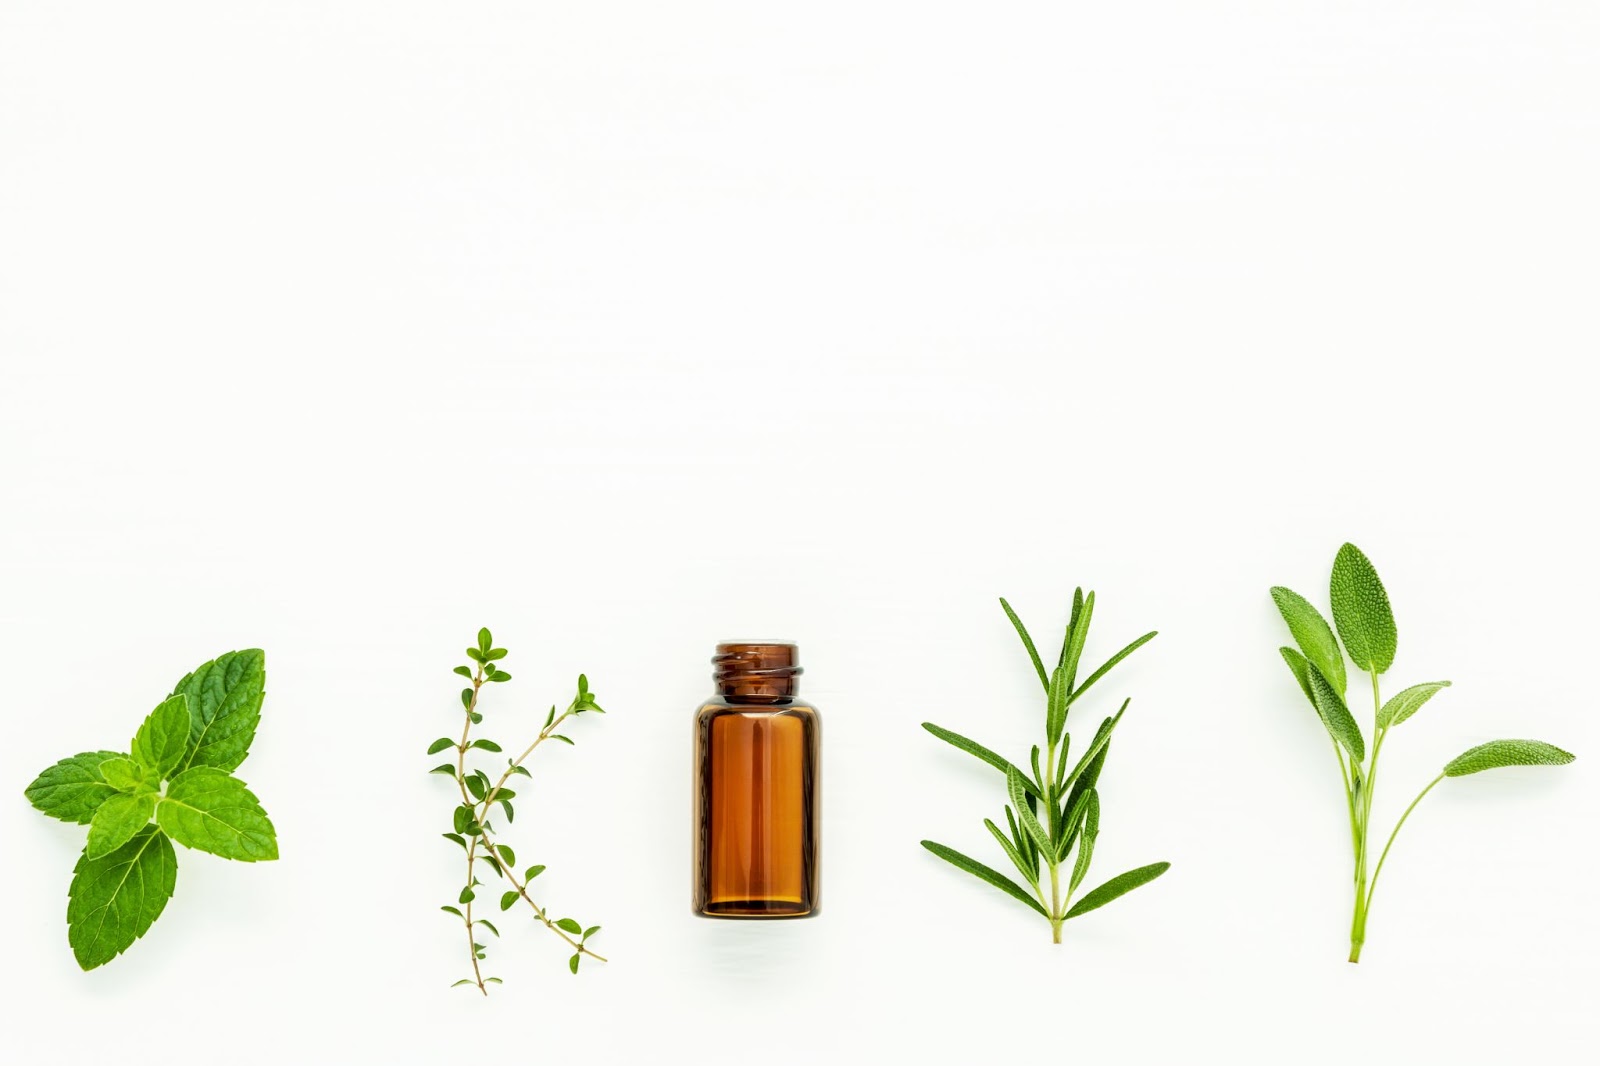 photo of four different herbs with a tiny brown glass bottle in the center